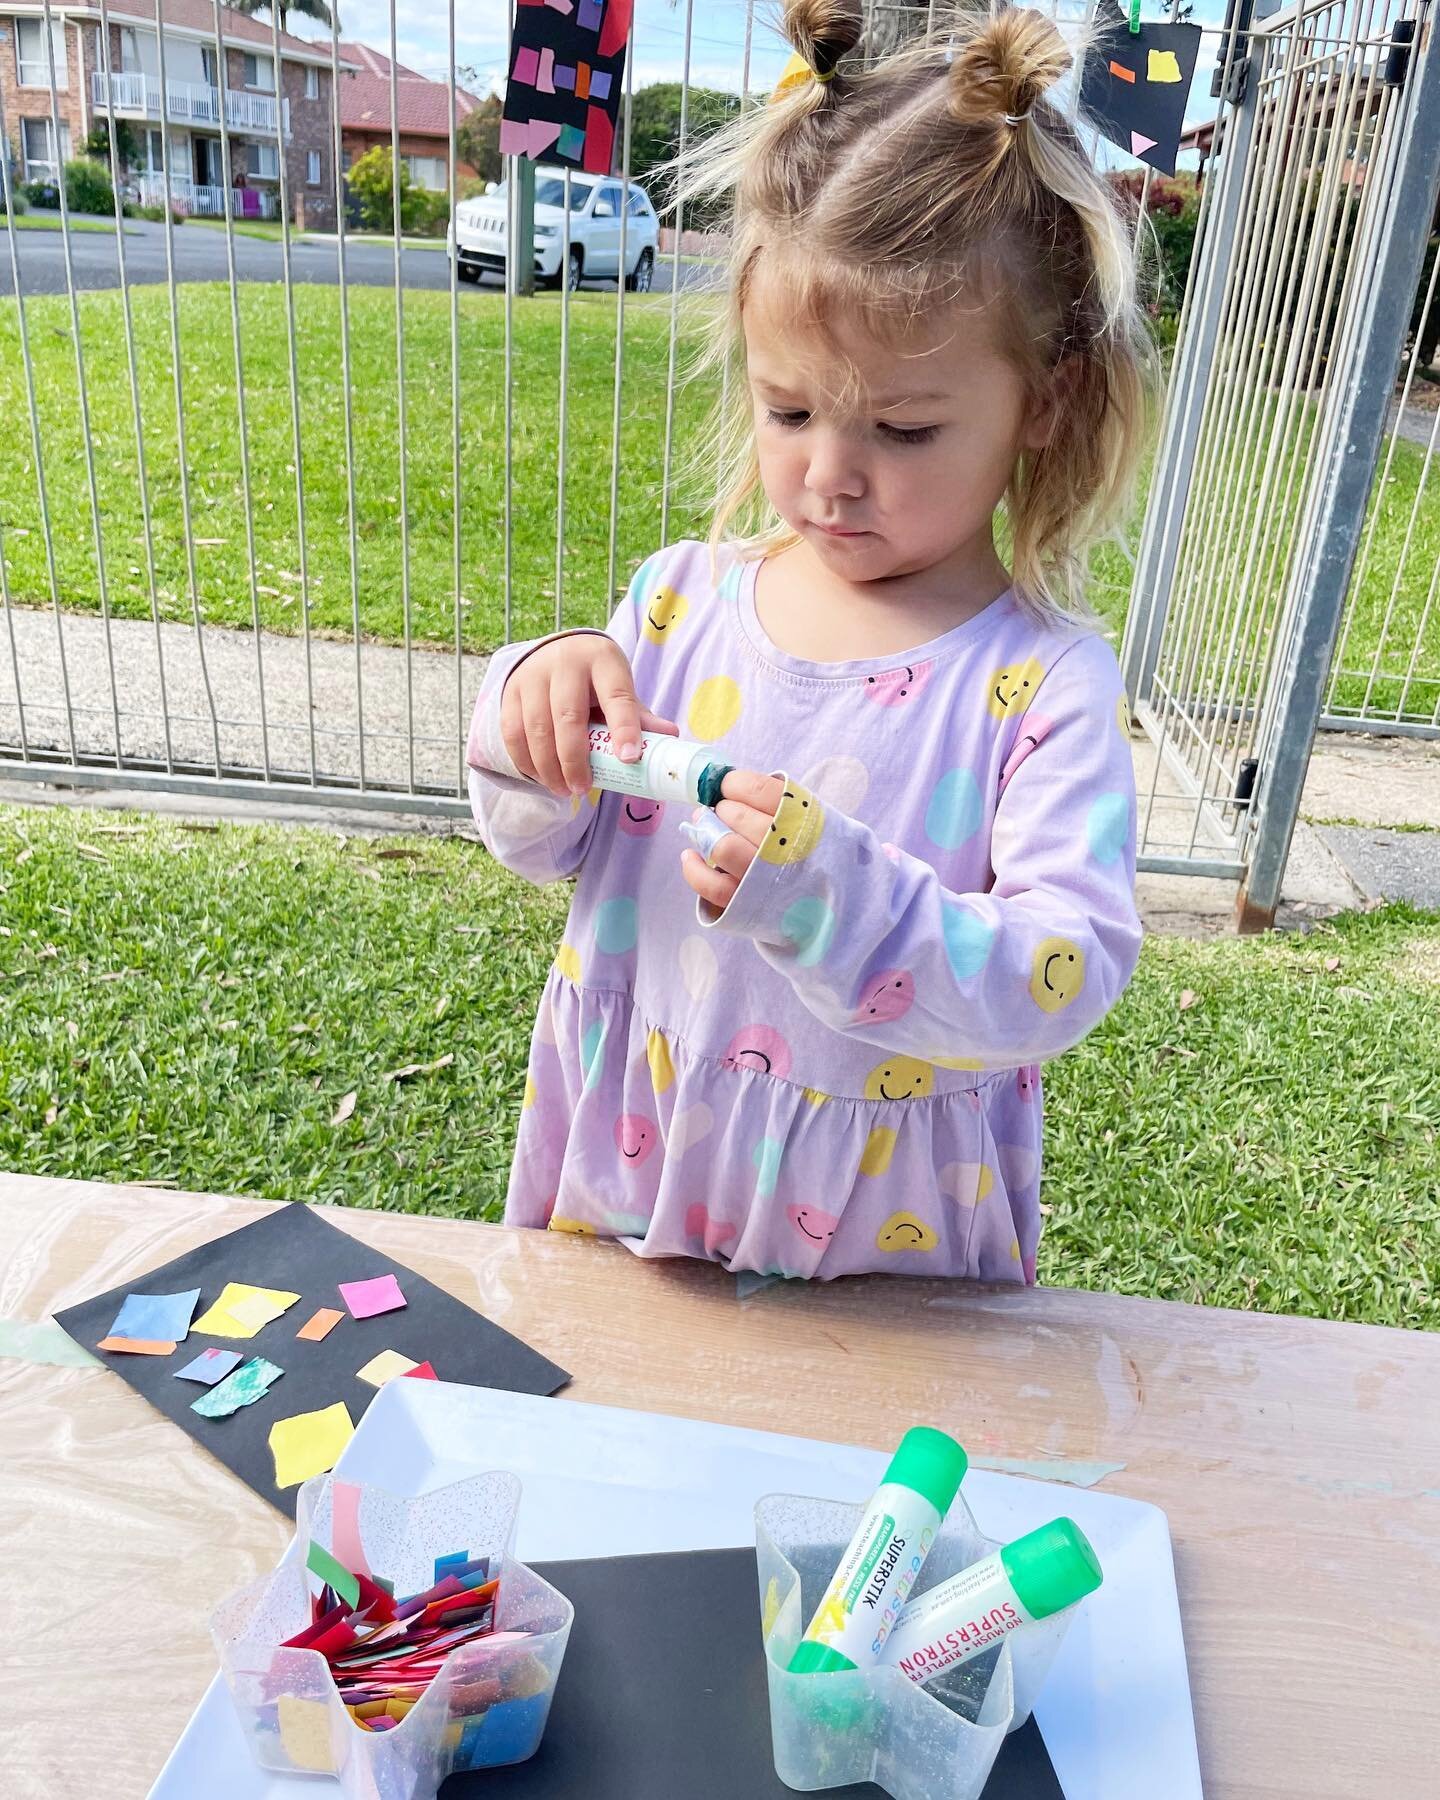 🌈I just love the little look of concentration🤩

Each week at Messy Art I provide a variety of materials and tools and give children the freedom to create on their own. When they have this freedom they are planning, experimenting &amp; problem-solvi